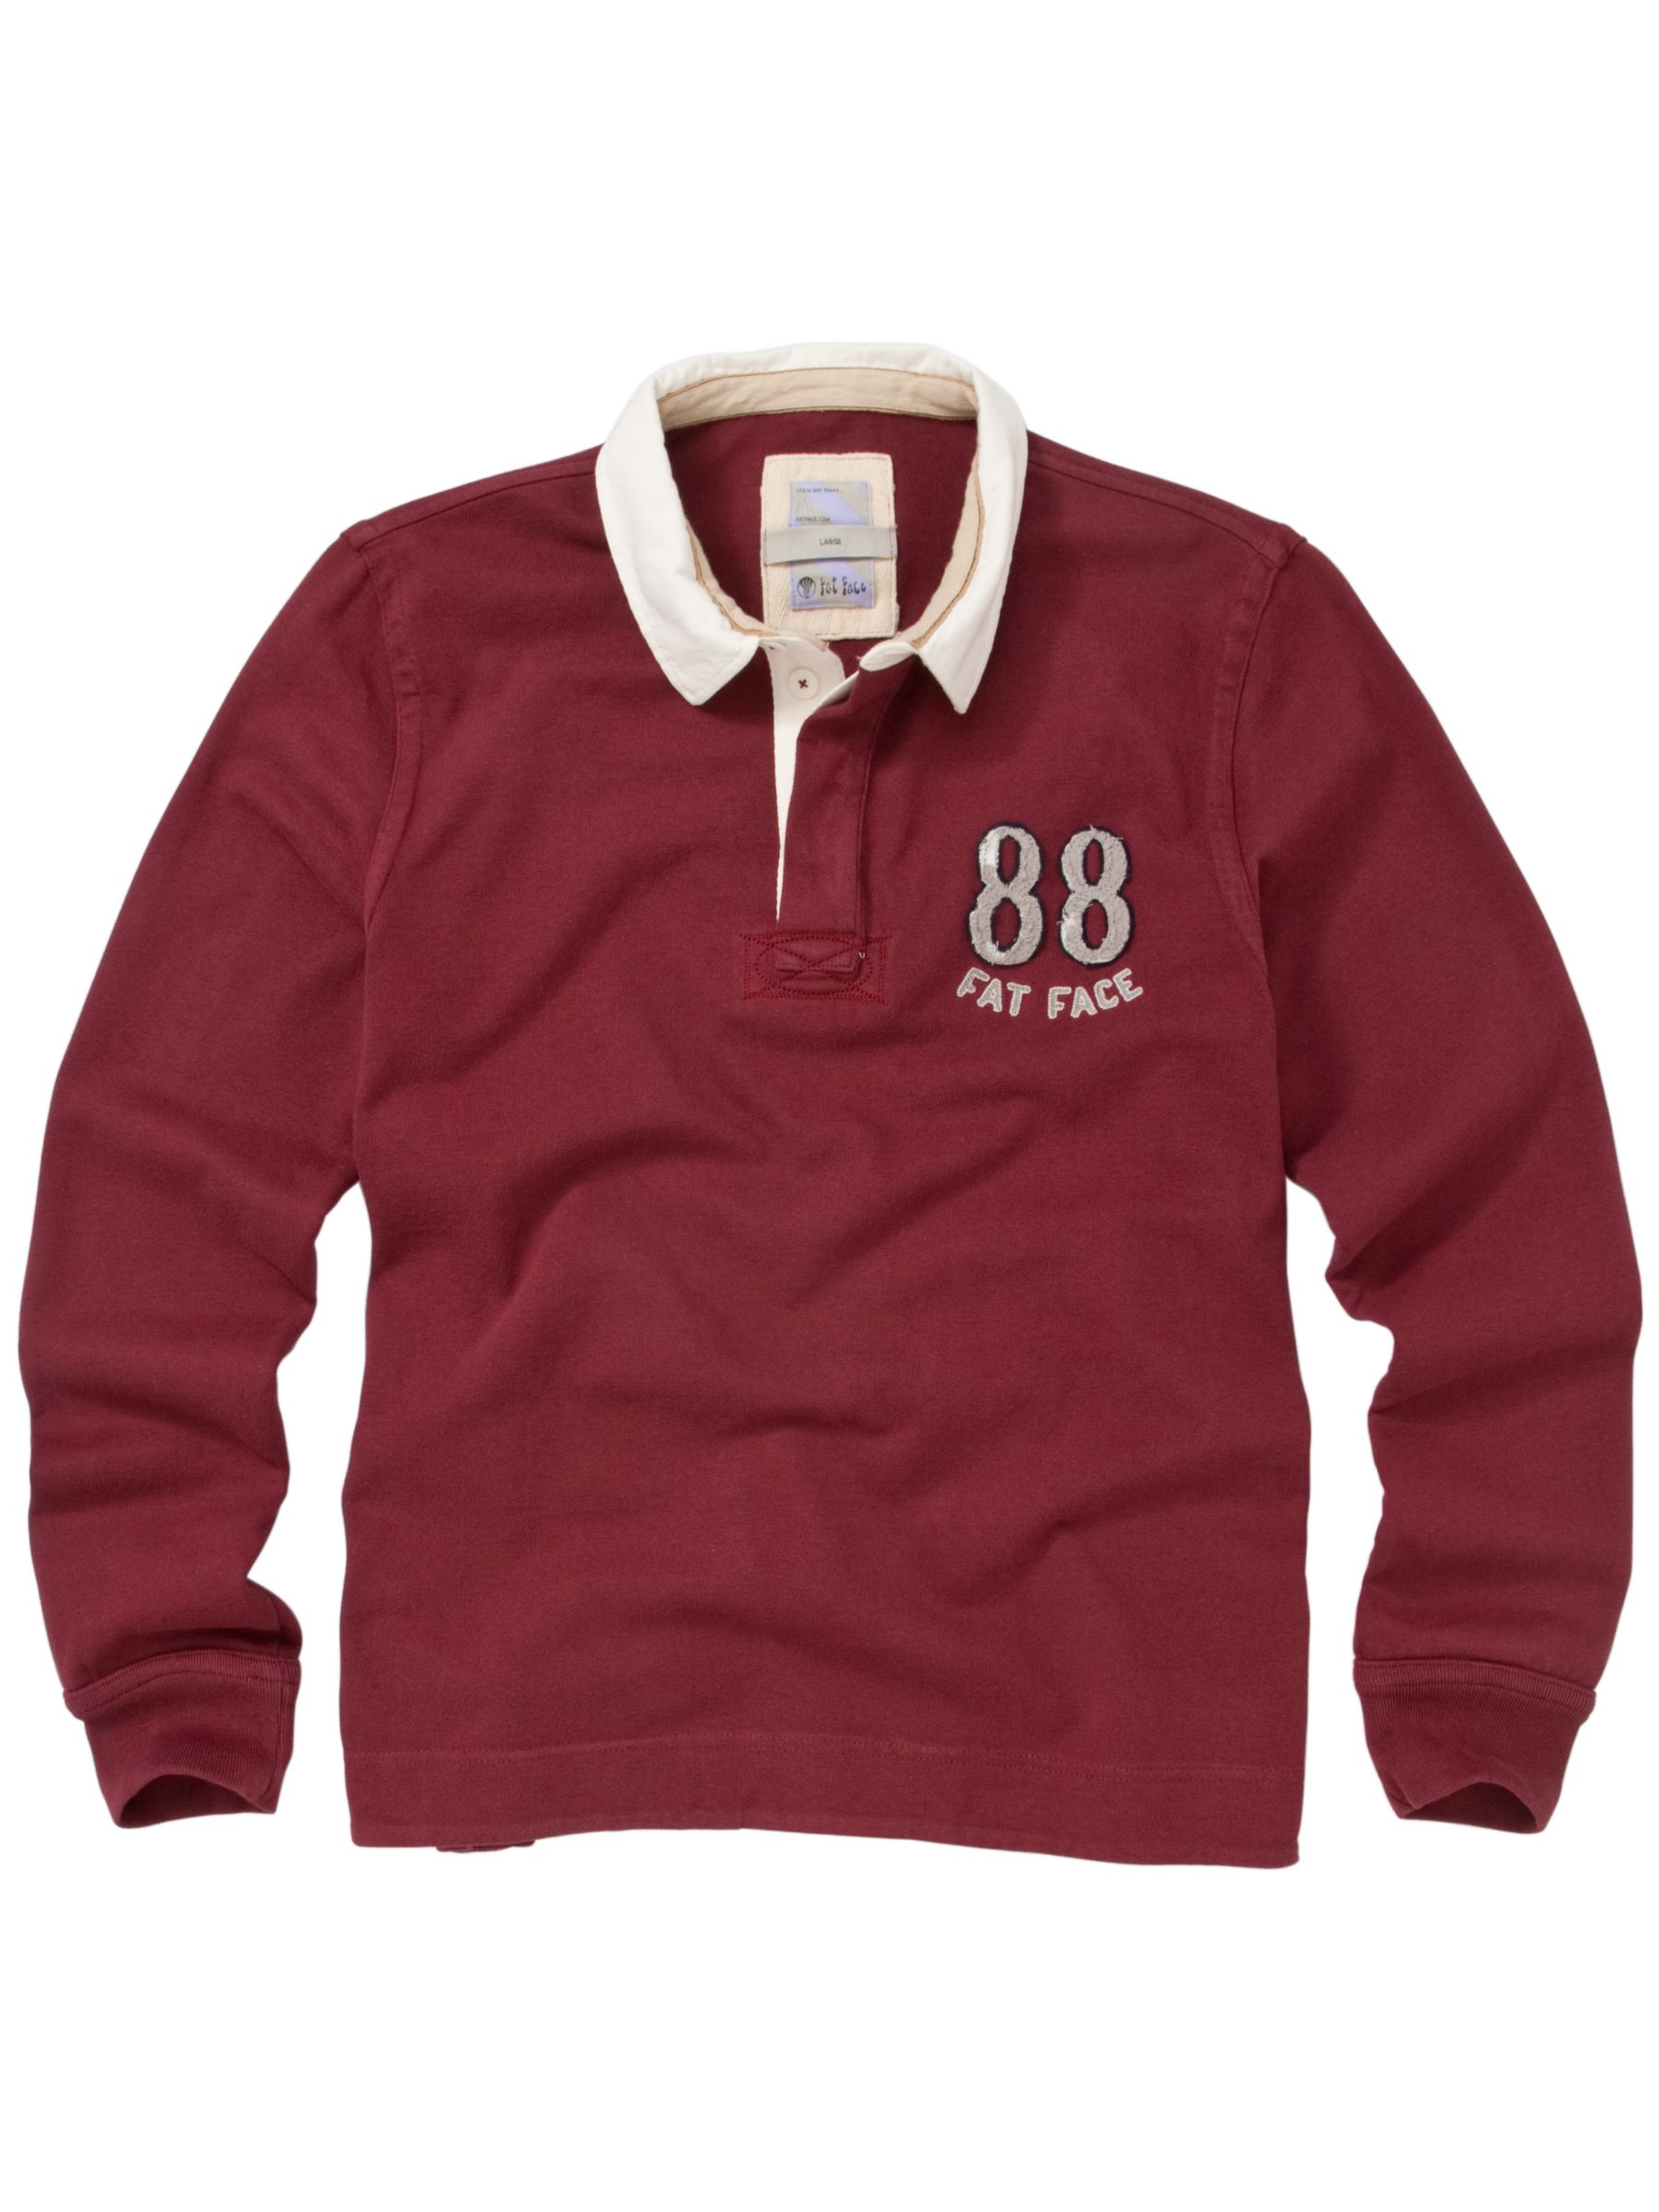 Fat Face Classic Rugby Shirt, Red